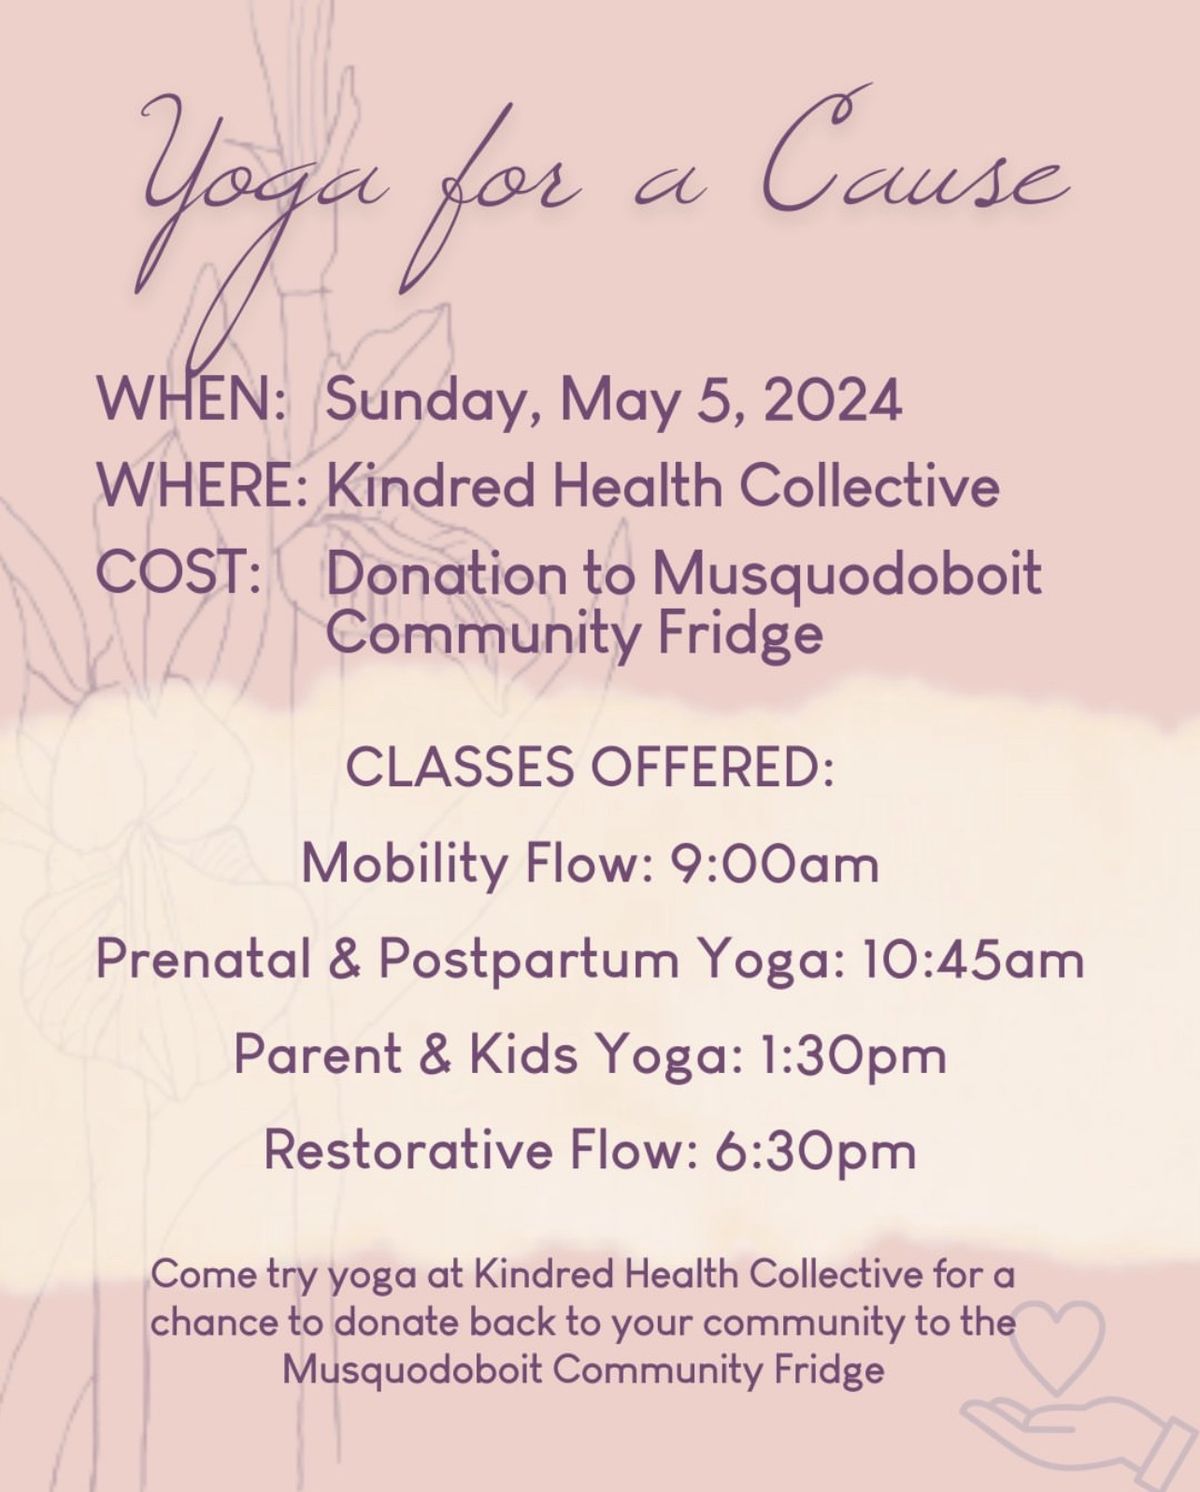 Yoga for a Cause\u2014\u2014 Try Yoga at Kindred